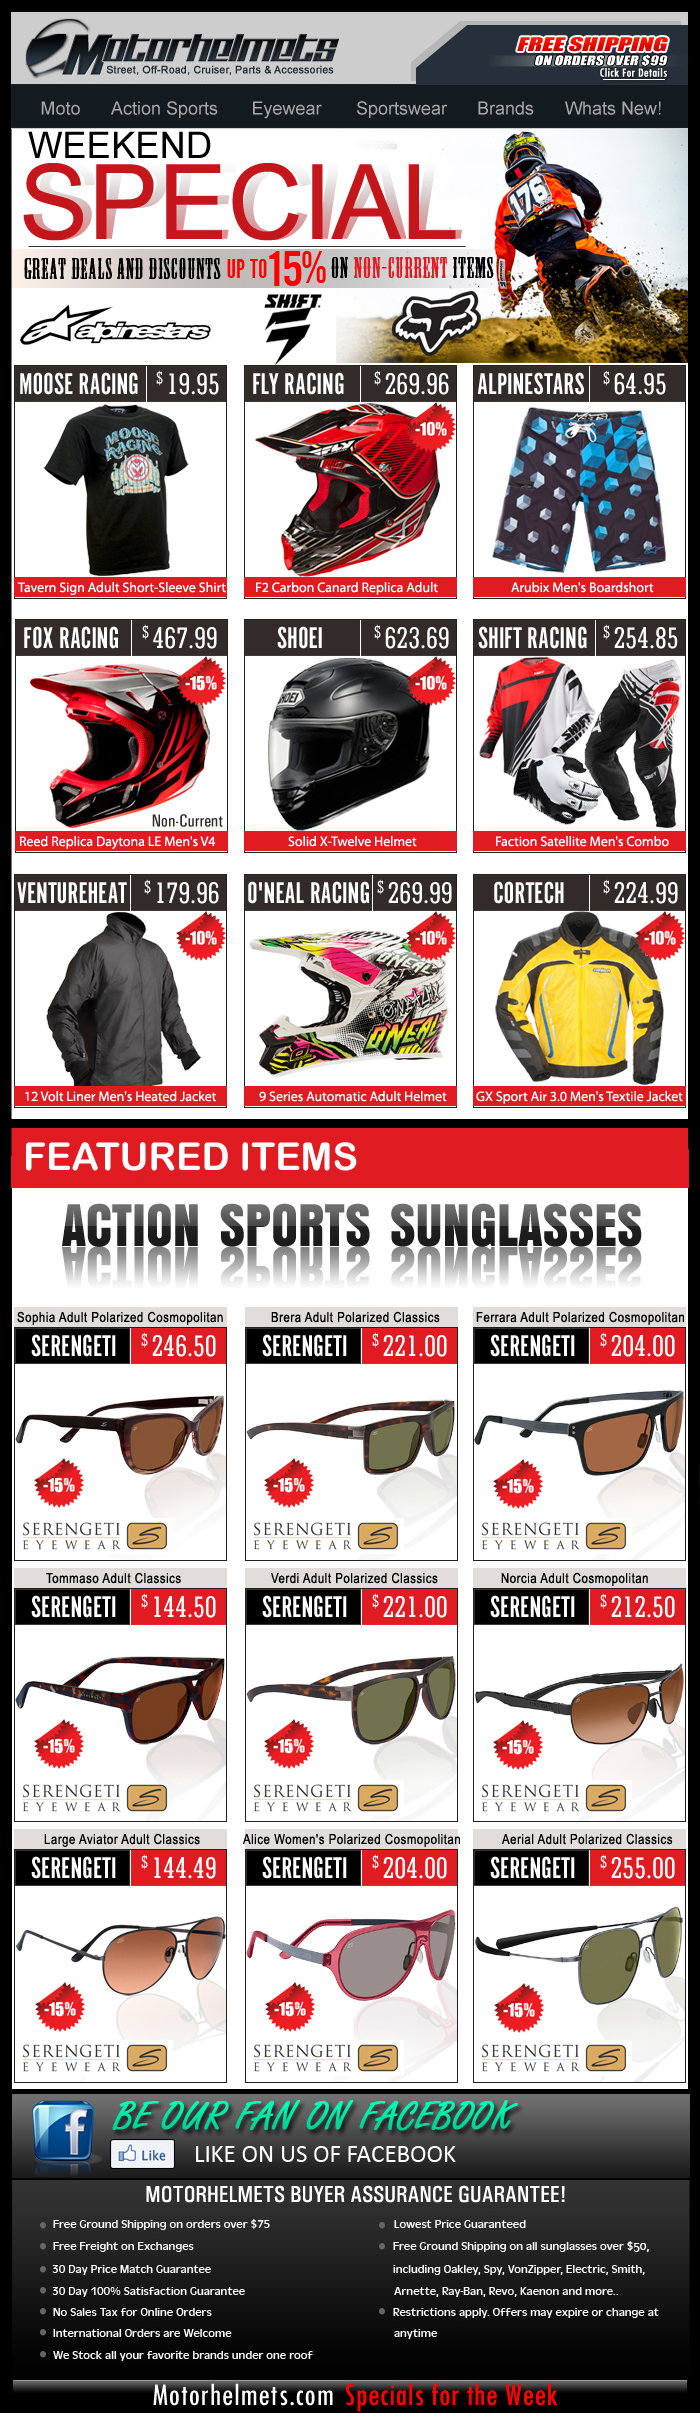 Up to 15% Off on Closeout Gear & Apparel from FOX, Fly, Shoei and more!